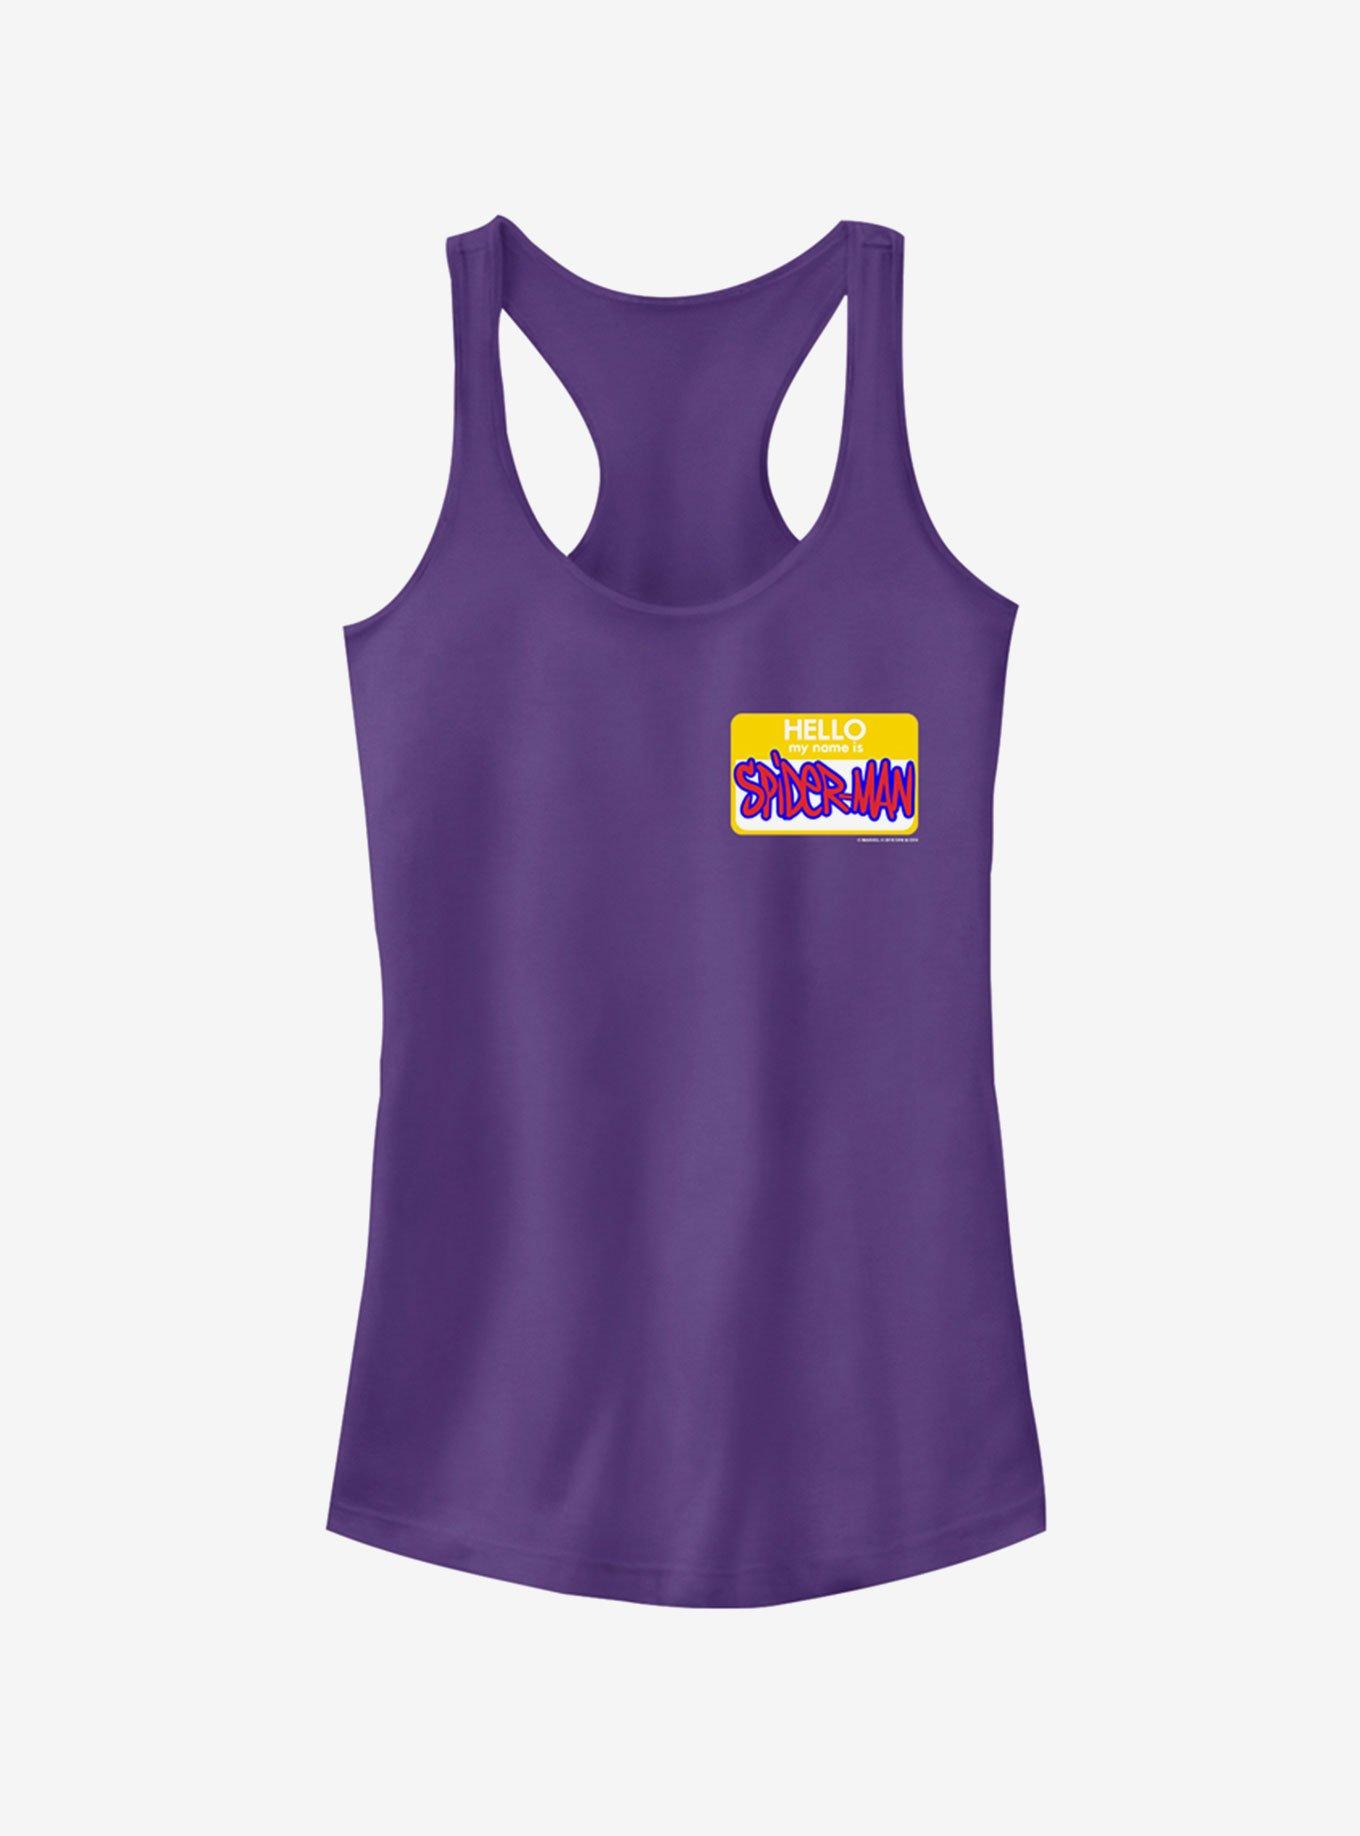 Marvel Spider-Man: Into The Spider-Verse Hello Spider-Man Name Tag Purple Girls Tank Top, PURPLE, hi-res